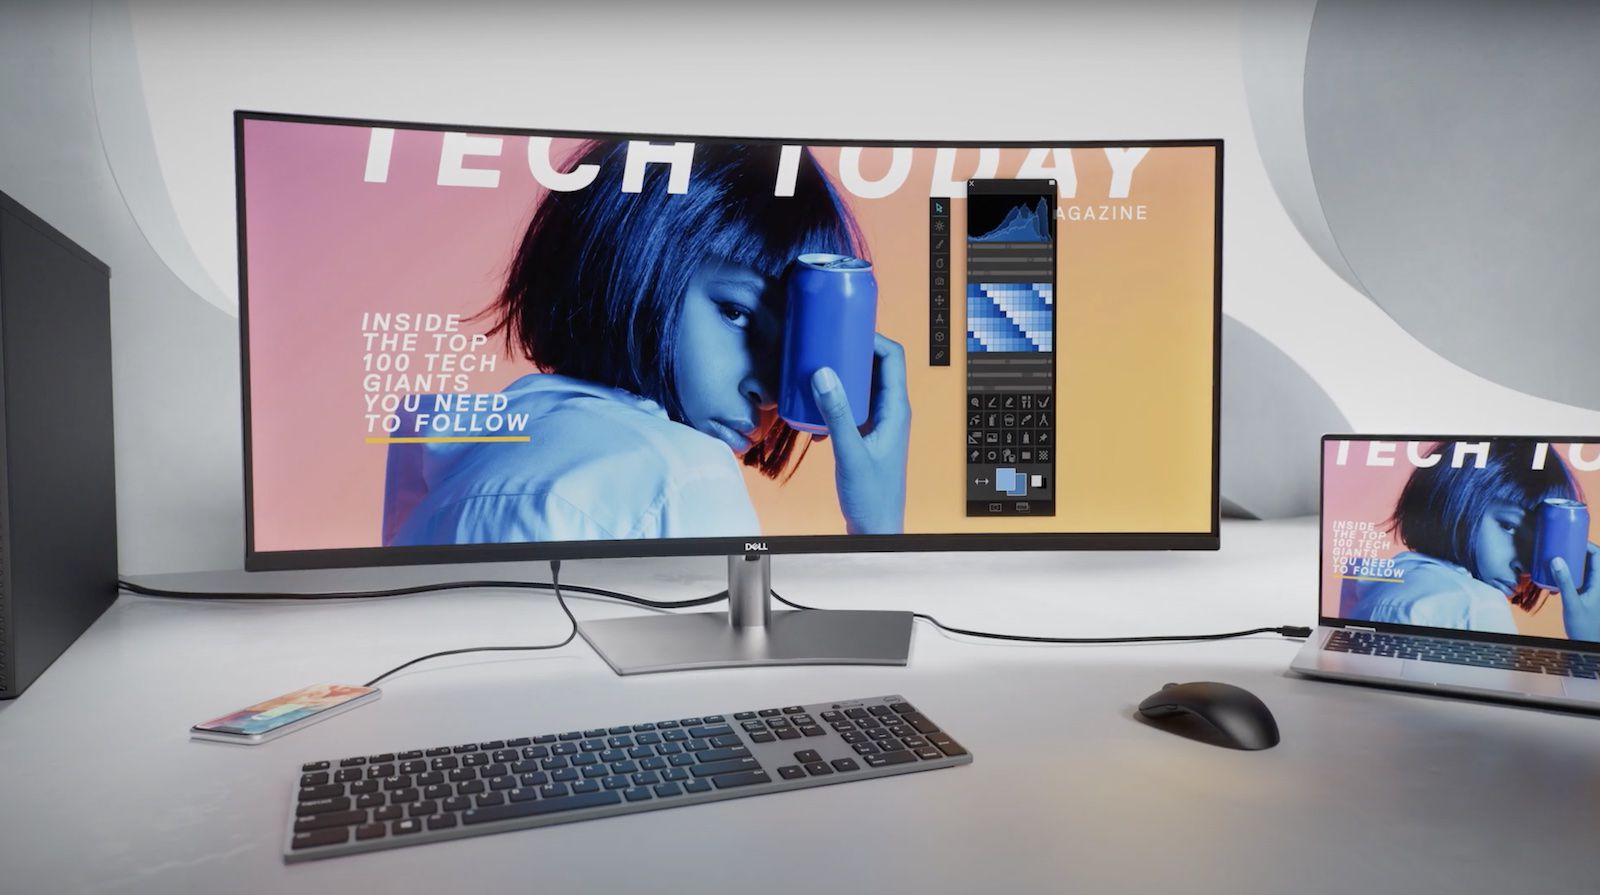 CES 2021: Dell introduces ultra-wide 40 “5K2K monitor with Thunderbolt 3 connectivity for Macs